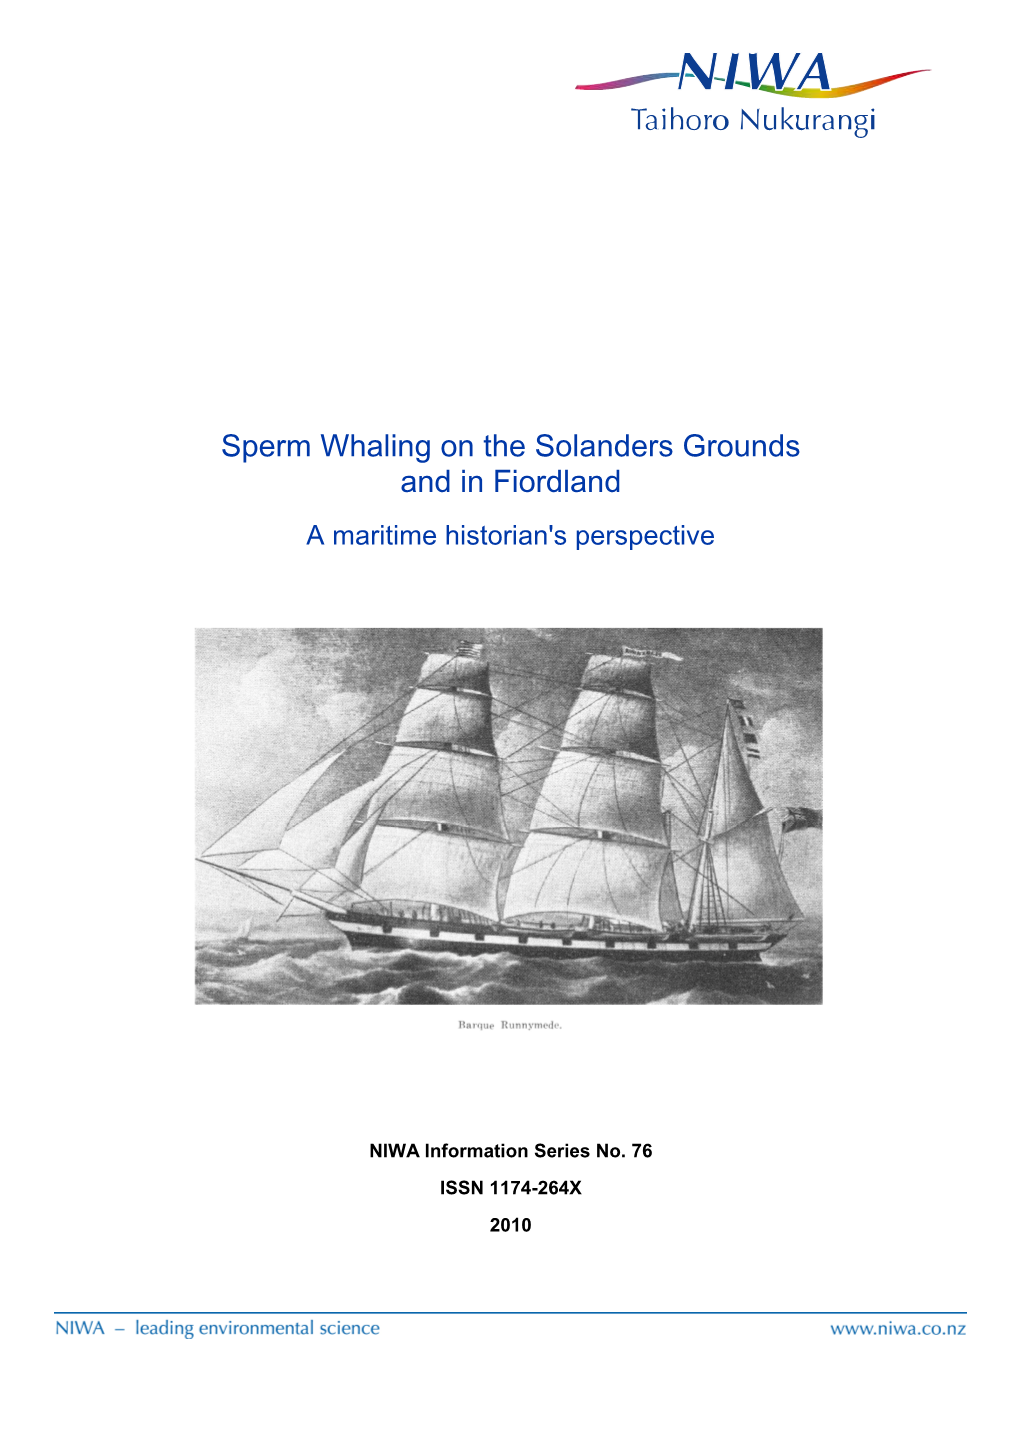 Sperm Whaling on the Solanders Grounds and in Fiordland a Maritime Historian's Perspective